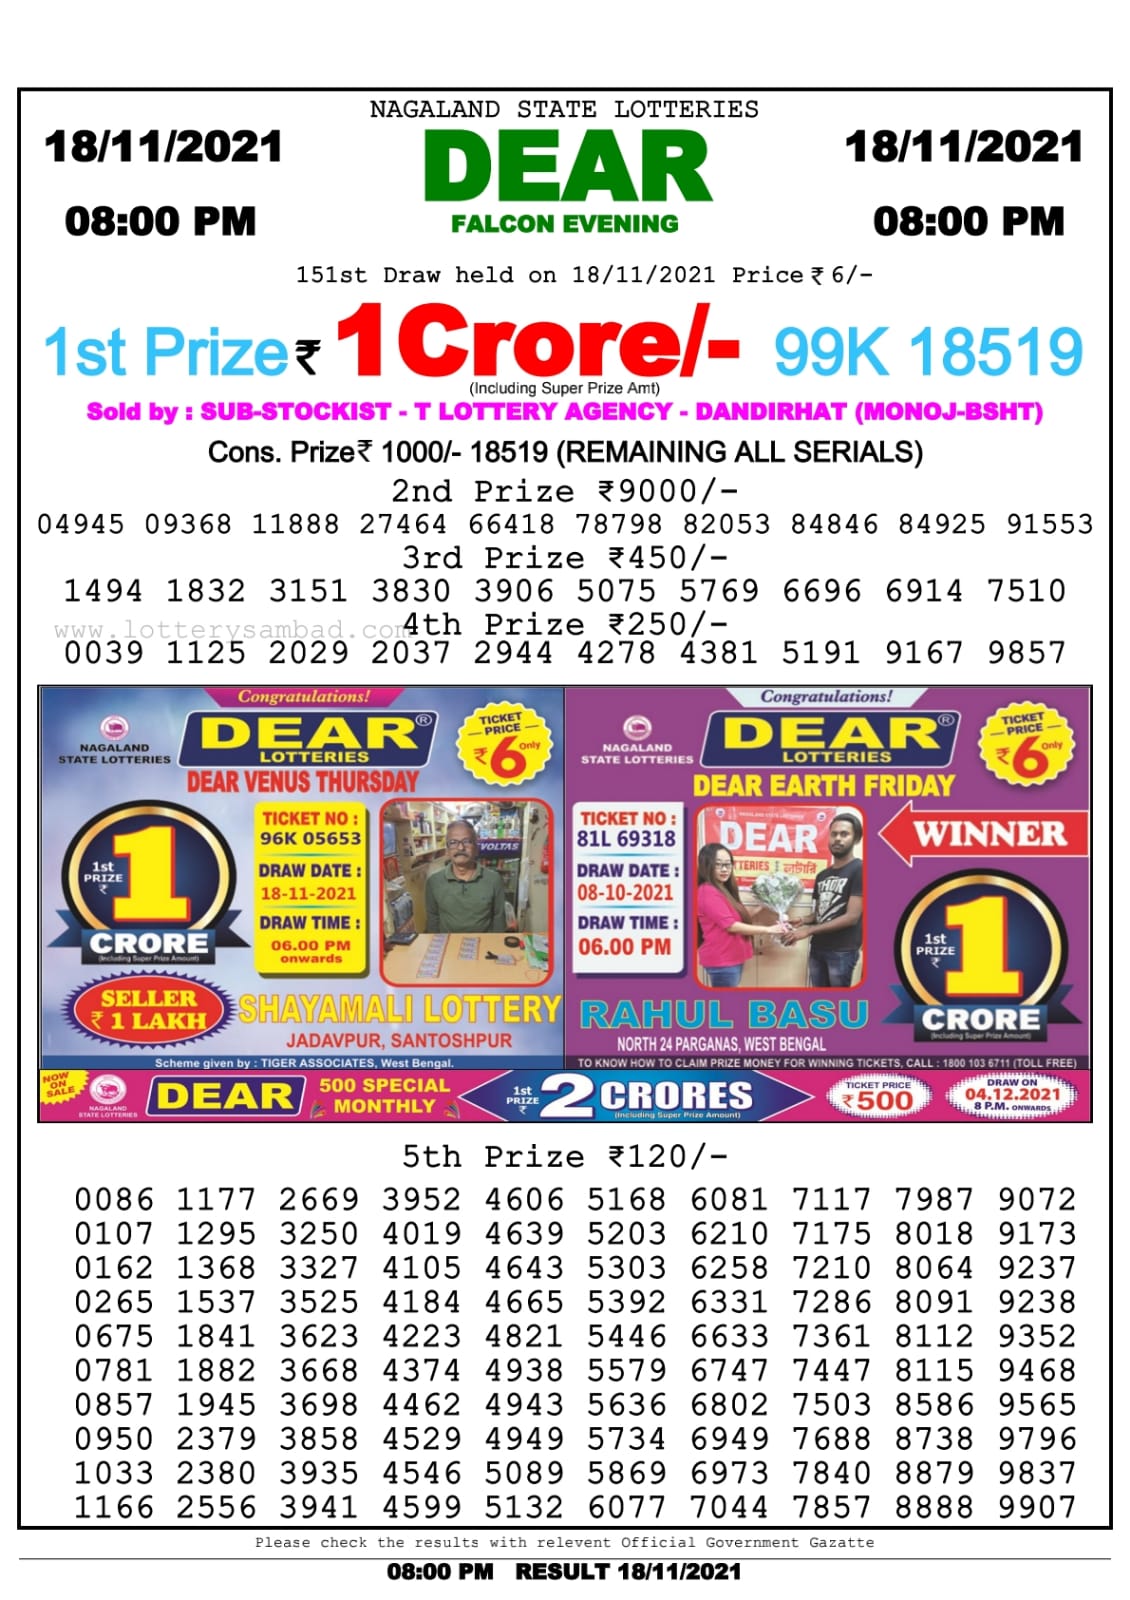 Dear Lottery Nagaland State Lottery Today 8:00 PM 18-11-2021